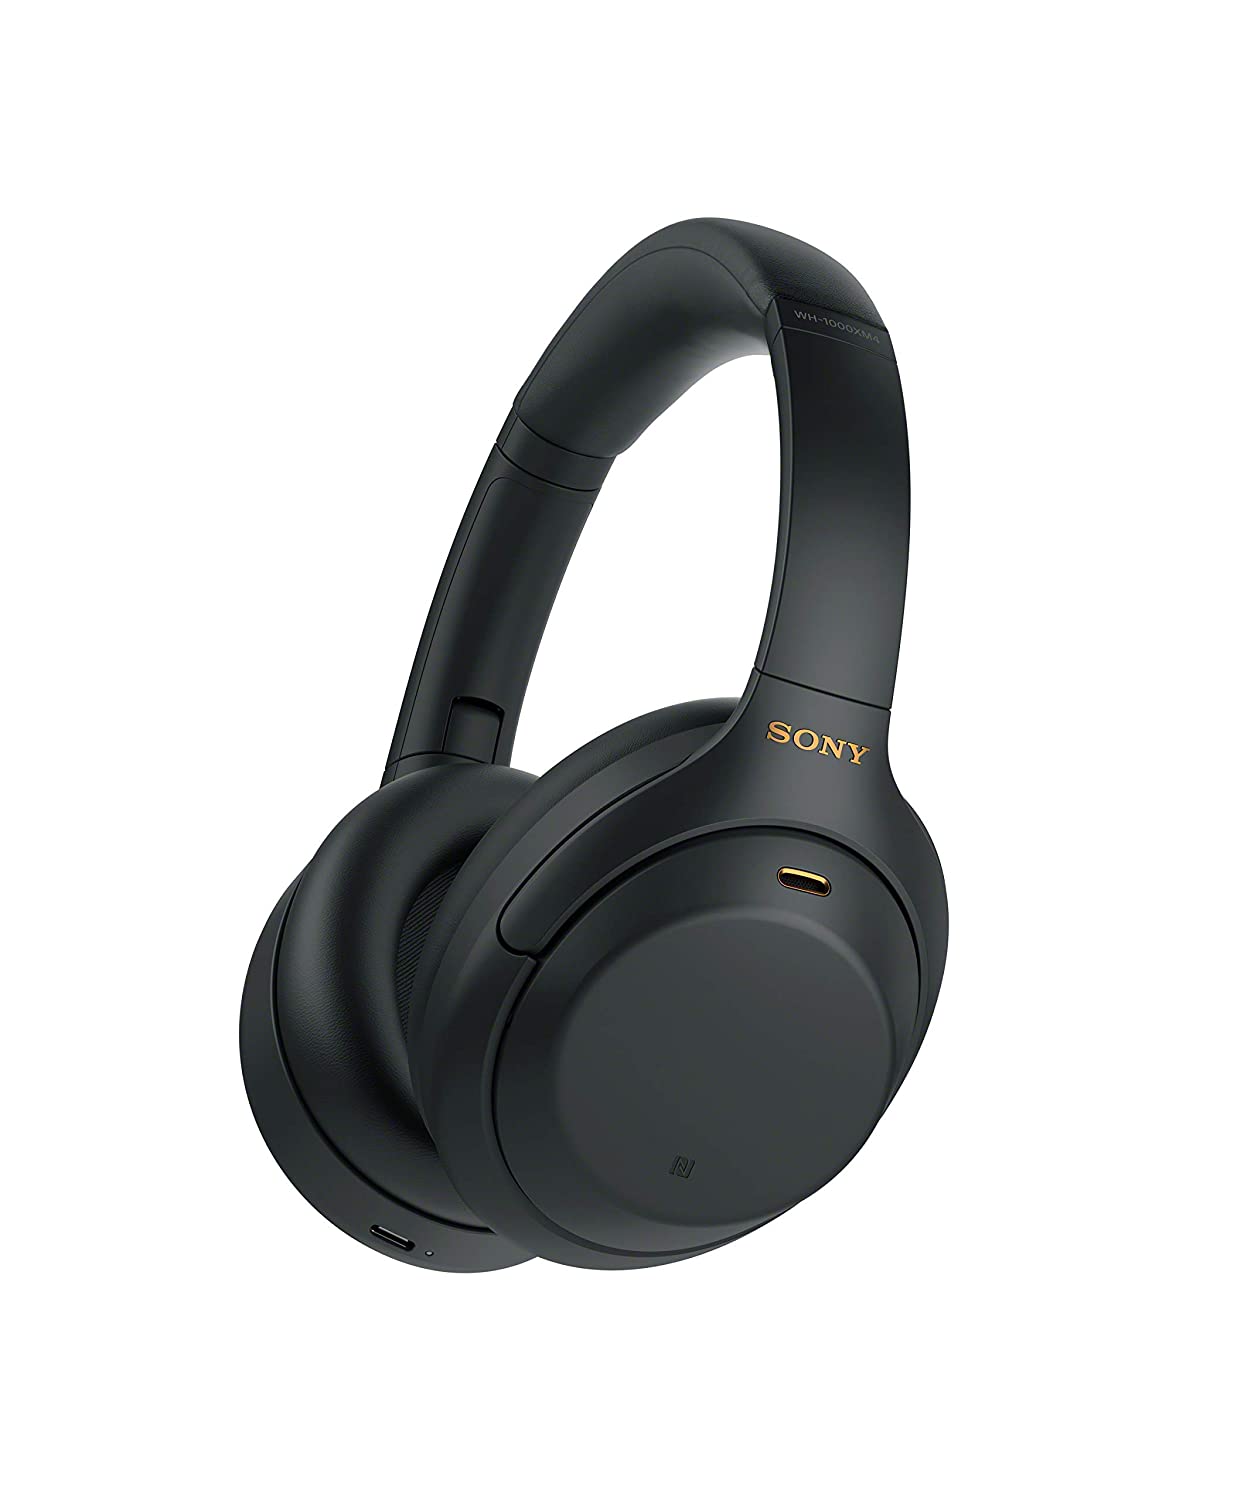 Buy Refurbished Sony WH-1000XM4 Bluetooth Headphone Online in India at